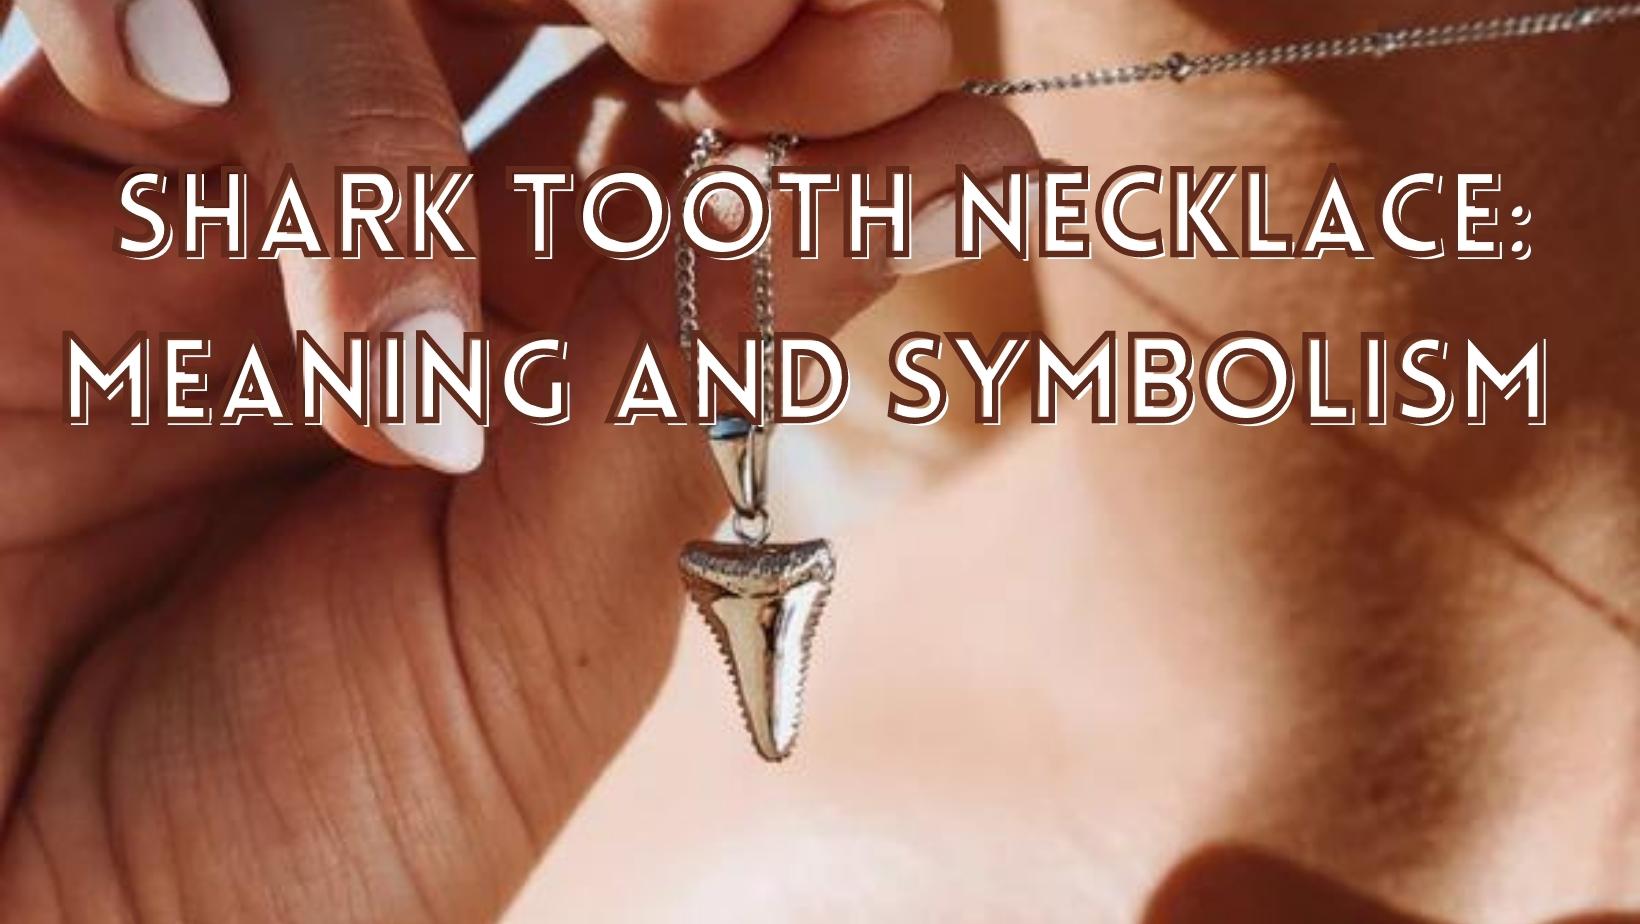 Meaning and symbolism of shark tooth necklace